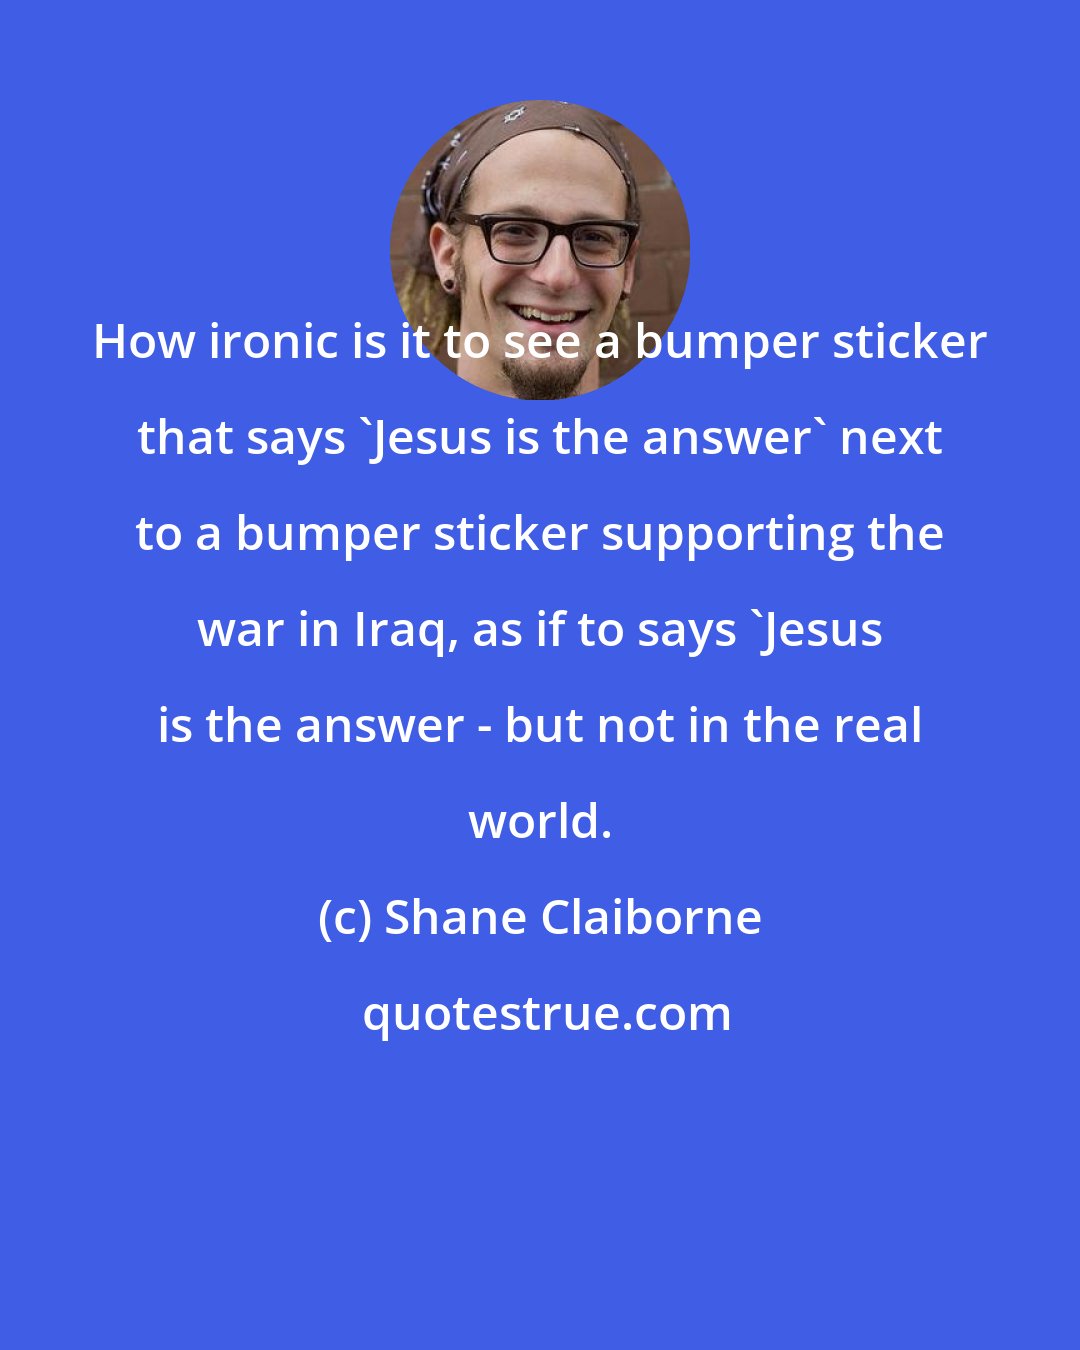 Shane Claiborne: How ironic is it to see a bumper sticker that says 'Jesus is the answer' next to a bumper sticker supporting the war in Iraq, as if to says 'Jesus is the answer - but not in the real world.